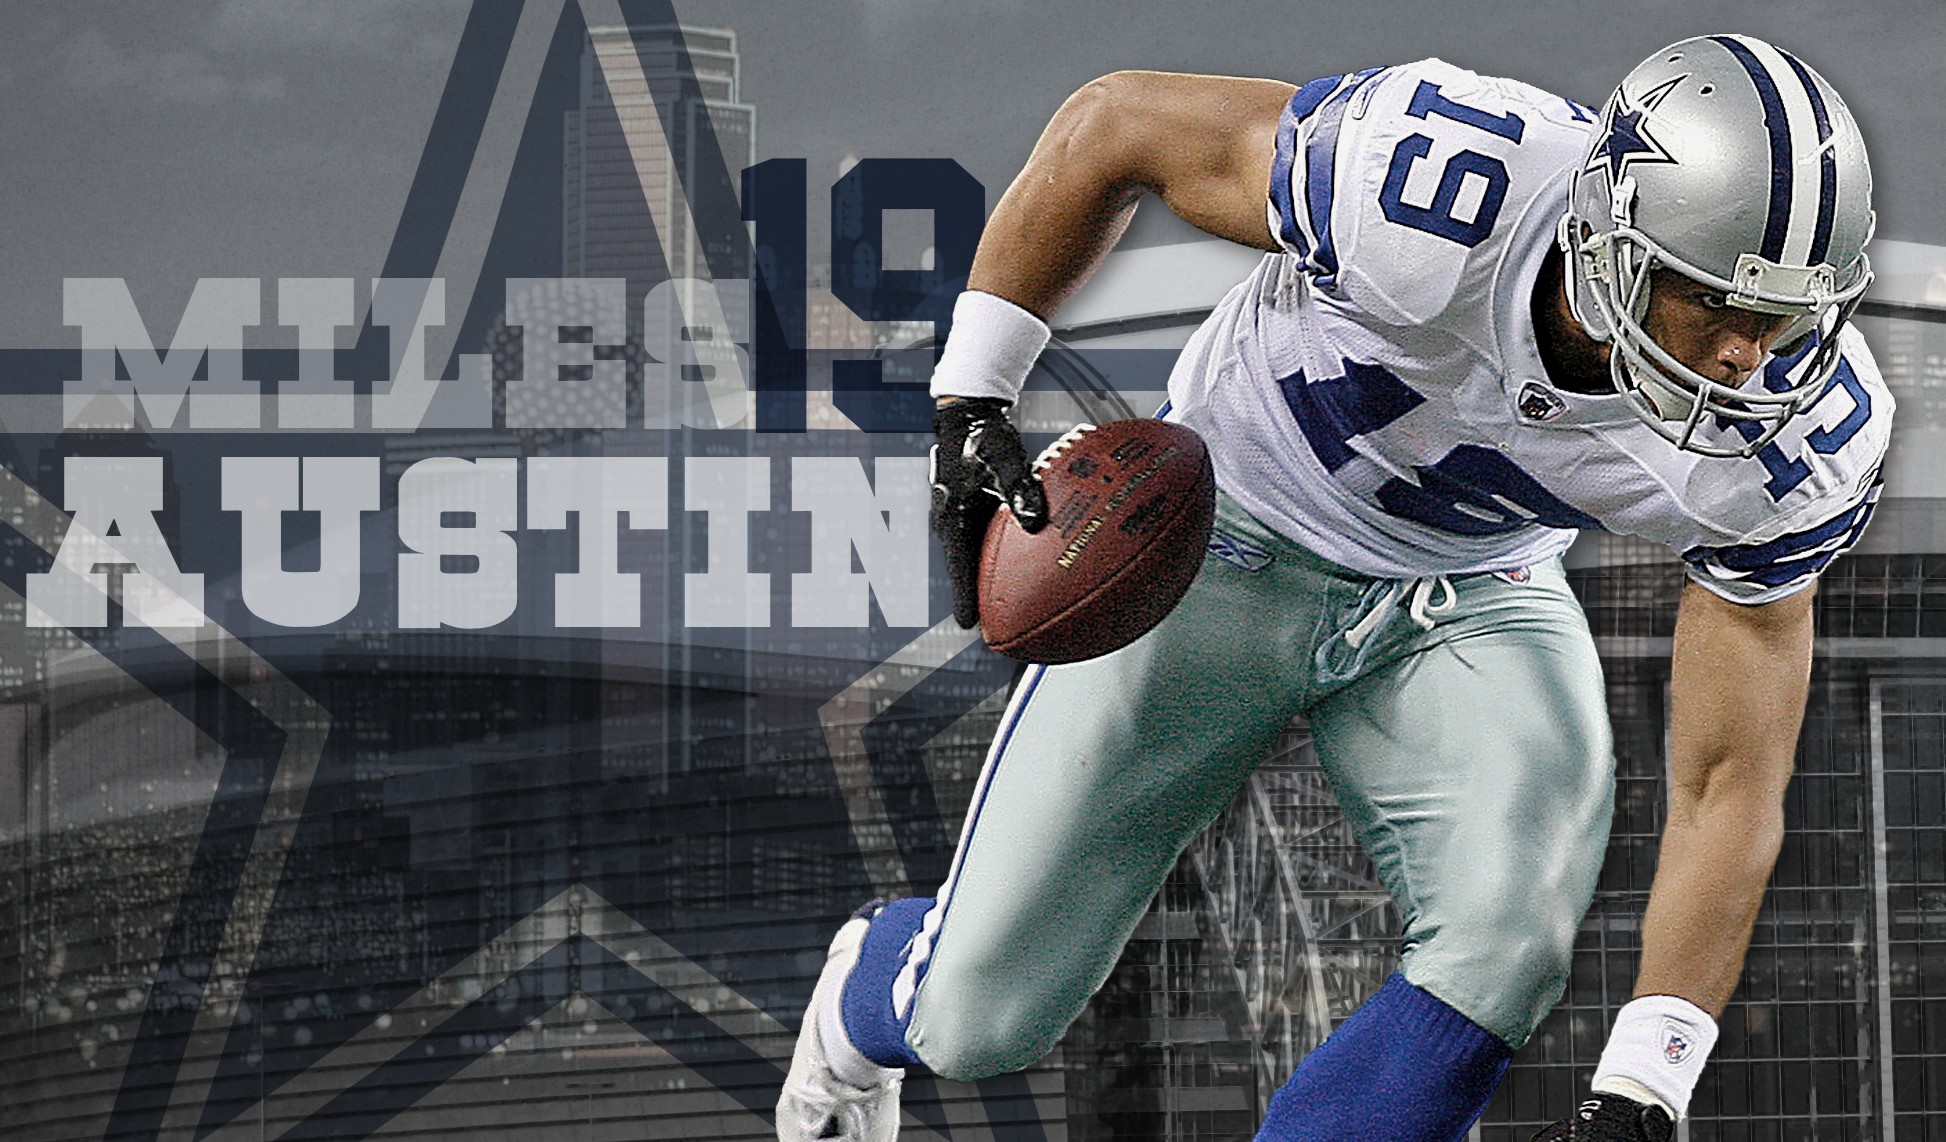 1946x1142 free images dallas cowboy wallpaper hd download high definiton wallpapers  windows 10 backgrounds amazing colourful free computer wallpapers colours  artwork ...